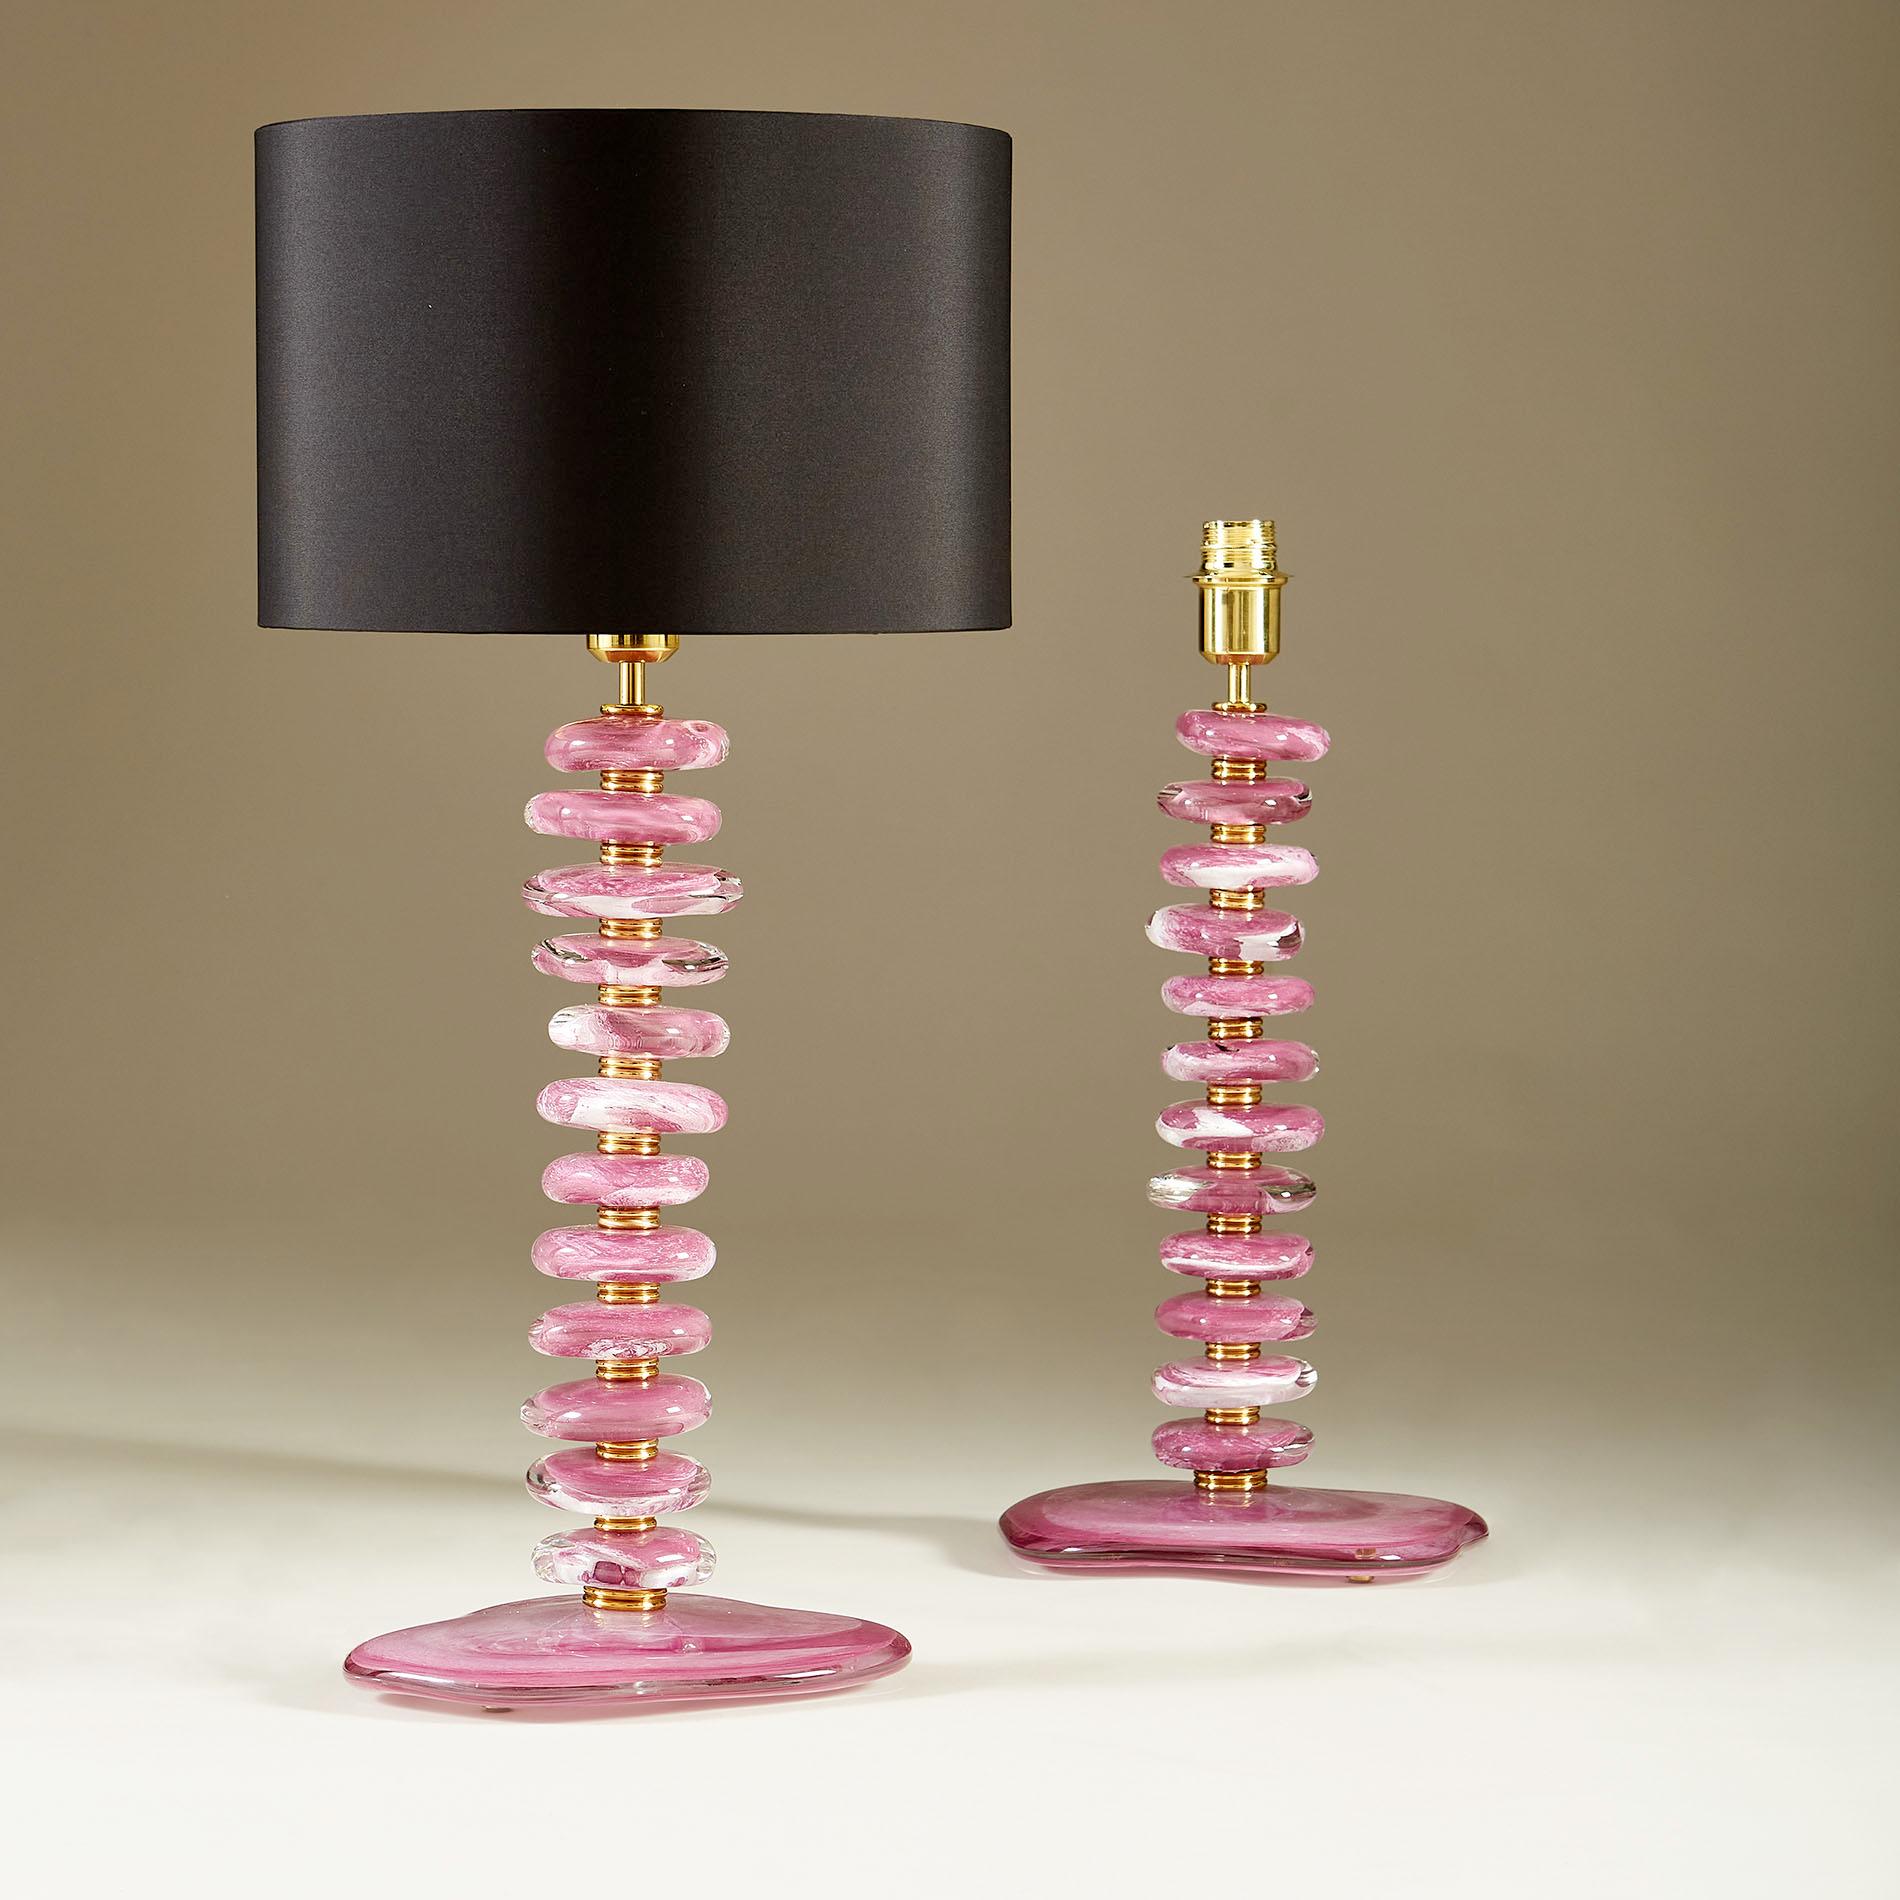 Substantial pair of contemporary table lamps. Each lamp consists of 12 handmade smooth sculptured pebbles in pink/purple hues with clear and white detail. Each pebble is interspersed with double ribbed sections of brass and a brass lamp fitting.